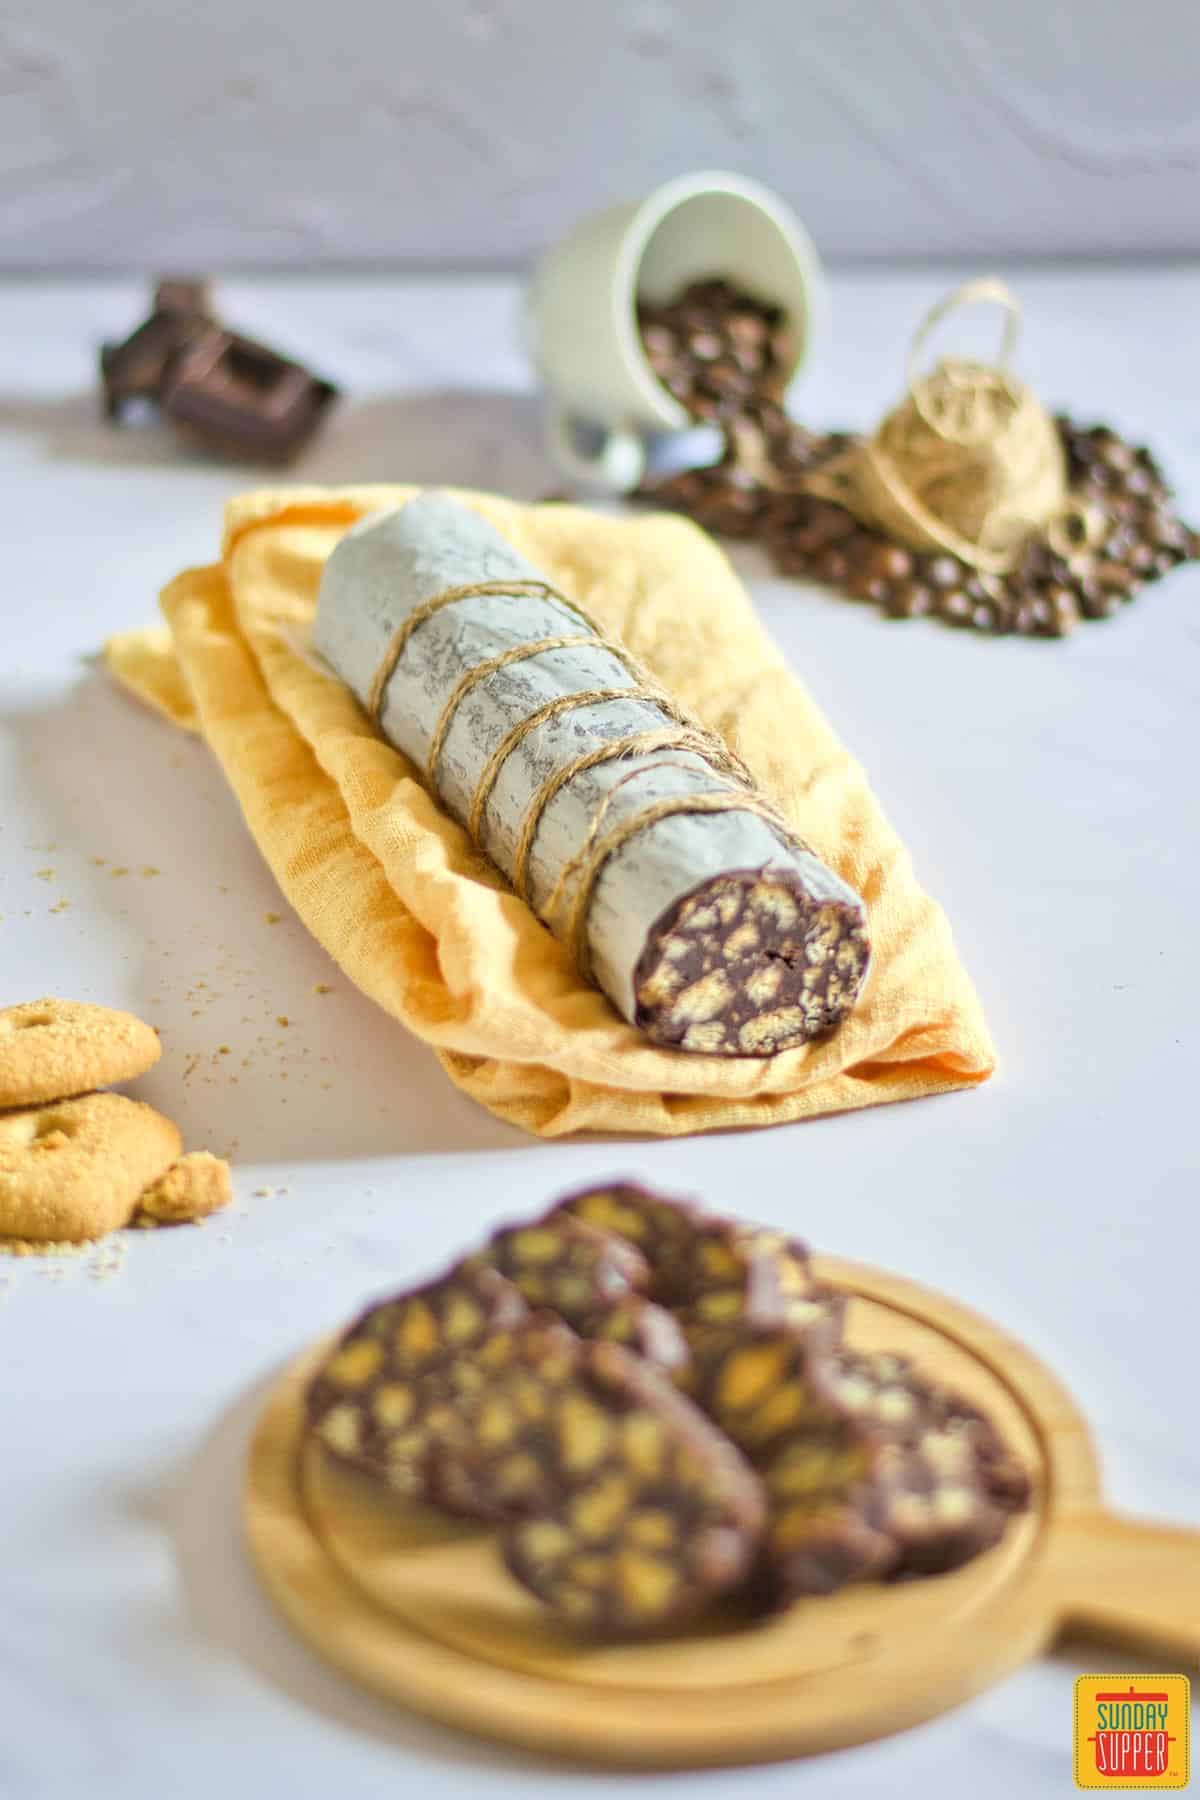 Portuguese chocolate salami on a yellow cloth with some sliced on a board